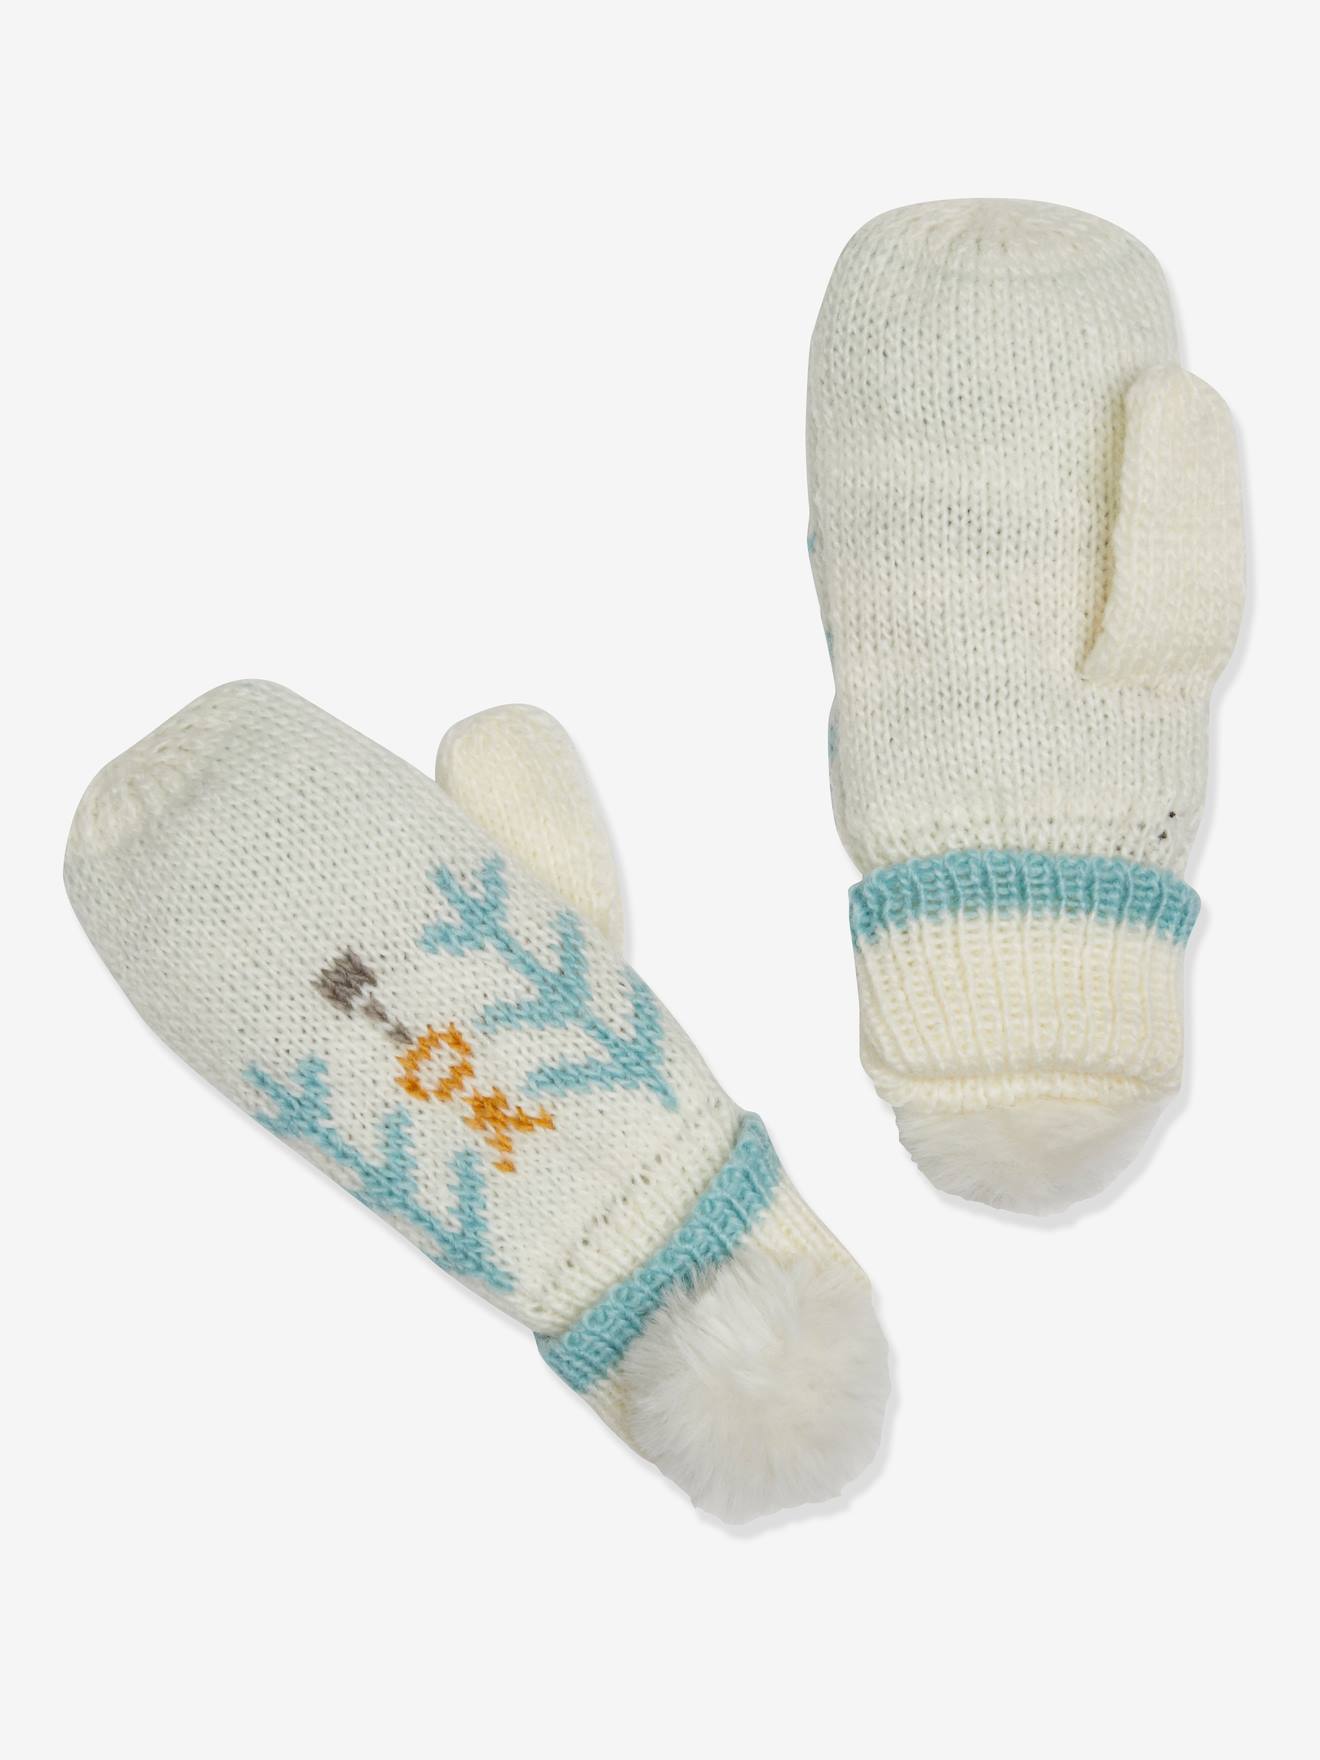 Jacquard Knit Gloves with Faux Fur Pompoms for Girls, Oeko Tex(r) multi